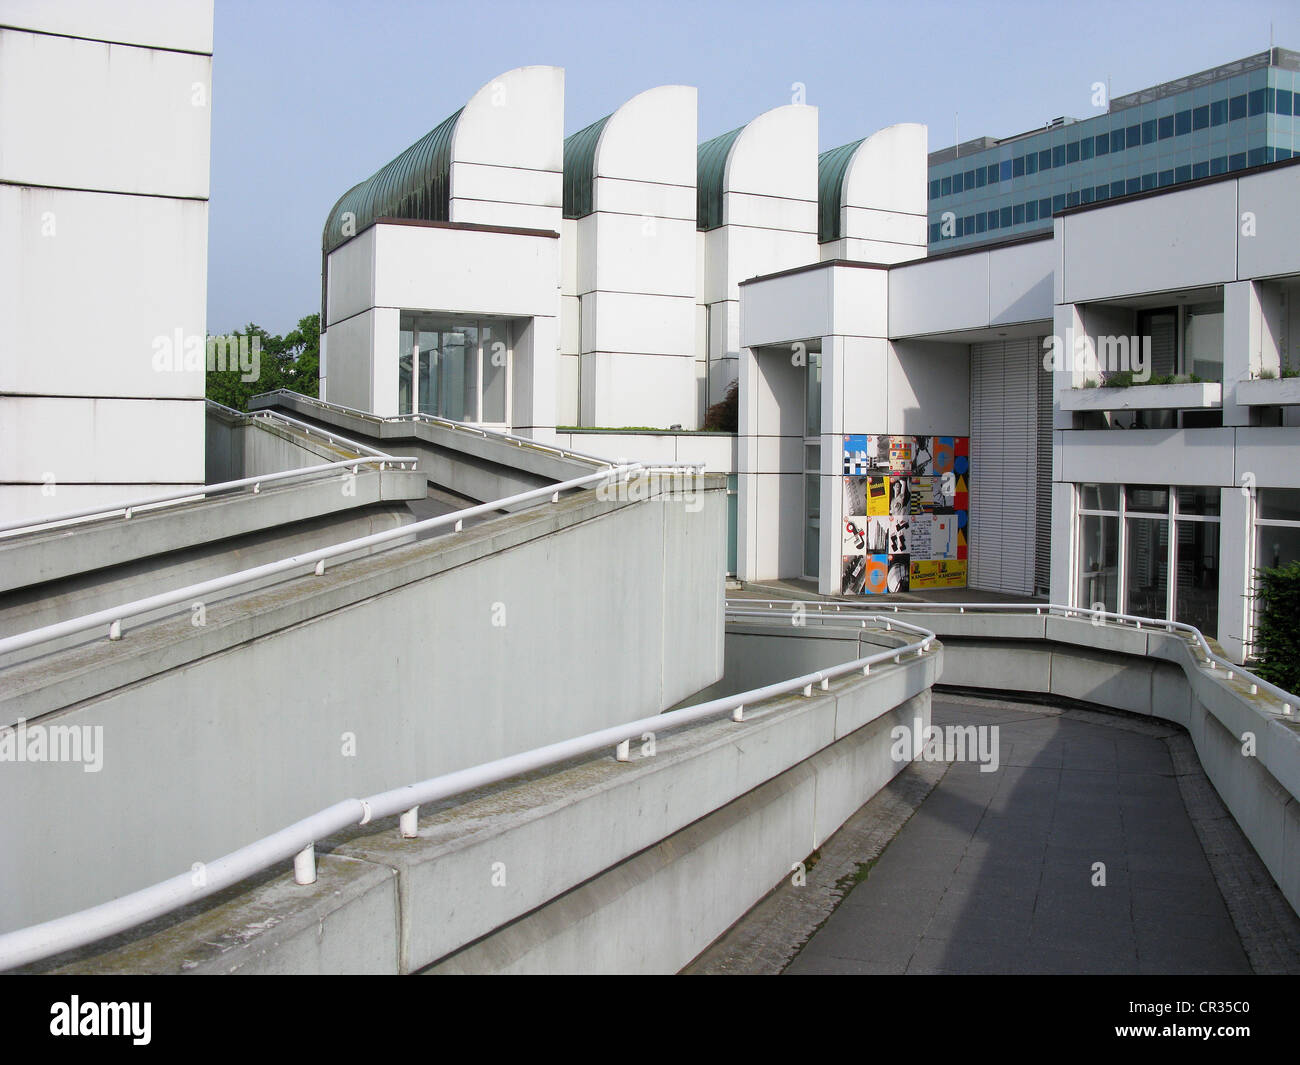 BERLIN, GERMANY. The Bauhaus Archive building, designed by Walter Gropius, one of the founders of the Bauhaus movement. Stock Photo